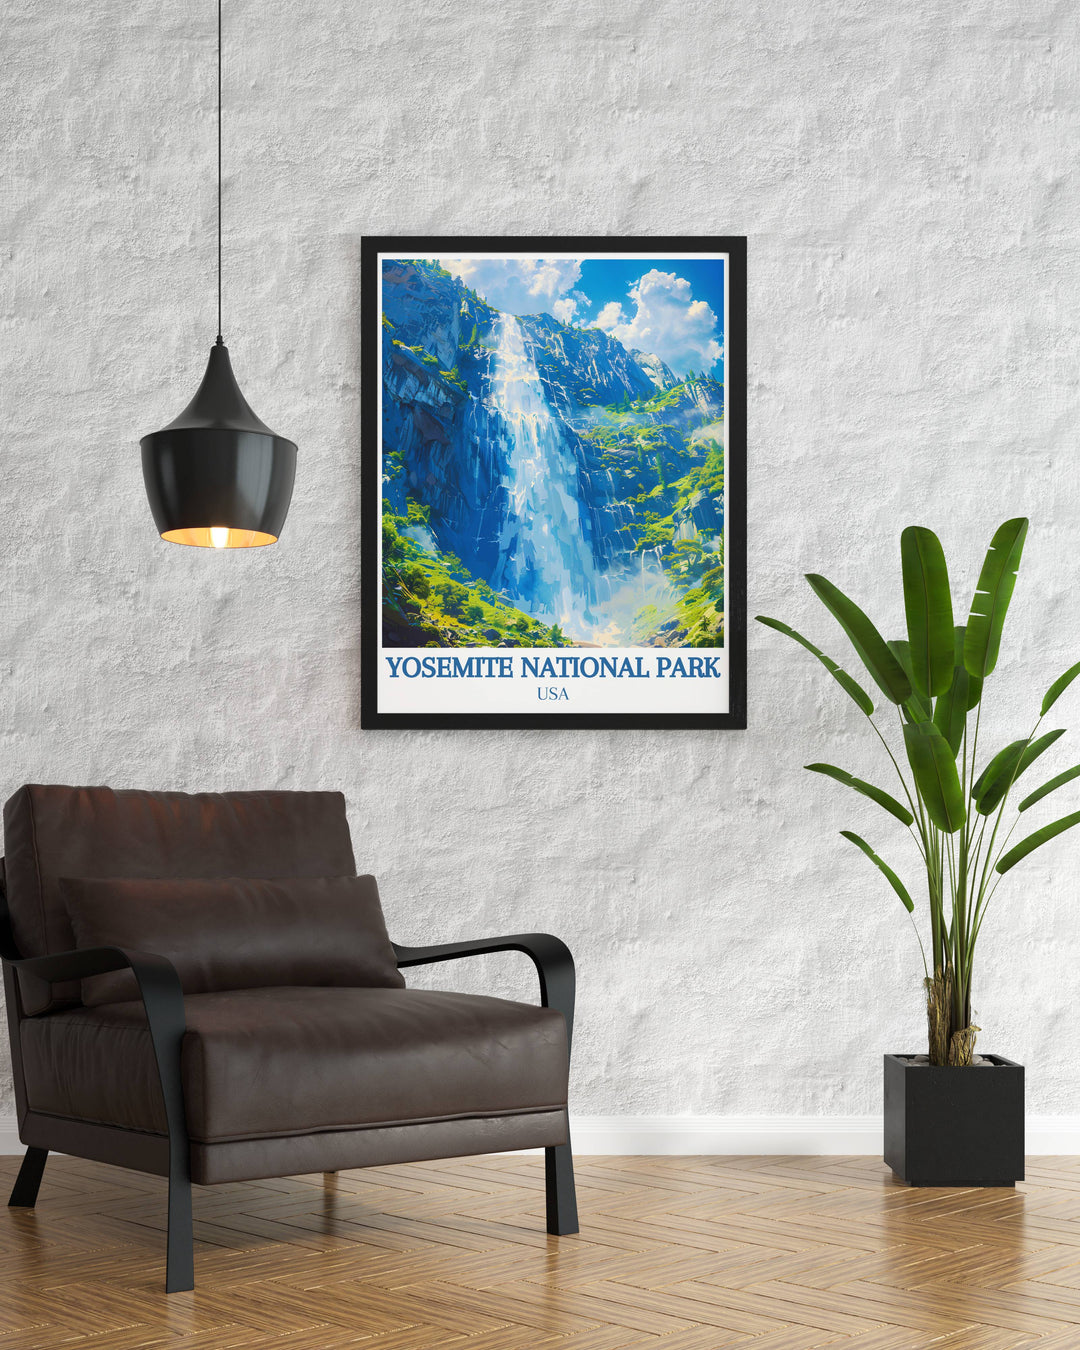 Yosemite National Park travel poster highlighting the dramatic scenery and towering waterfalls, a beautiful addition to any room and a celebration of the great outdoors.